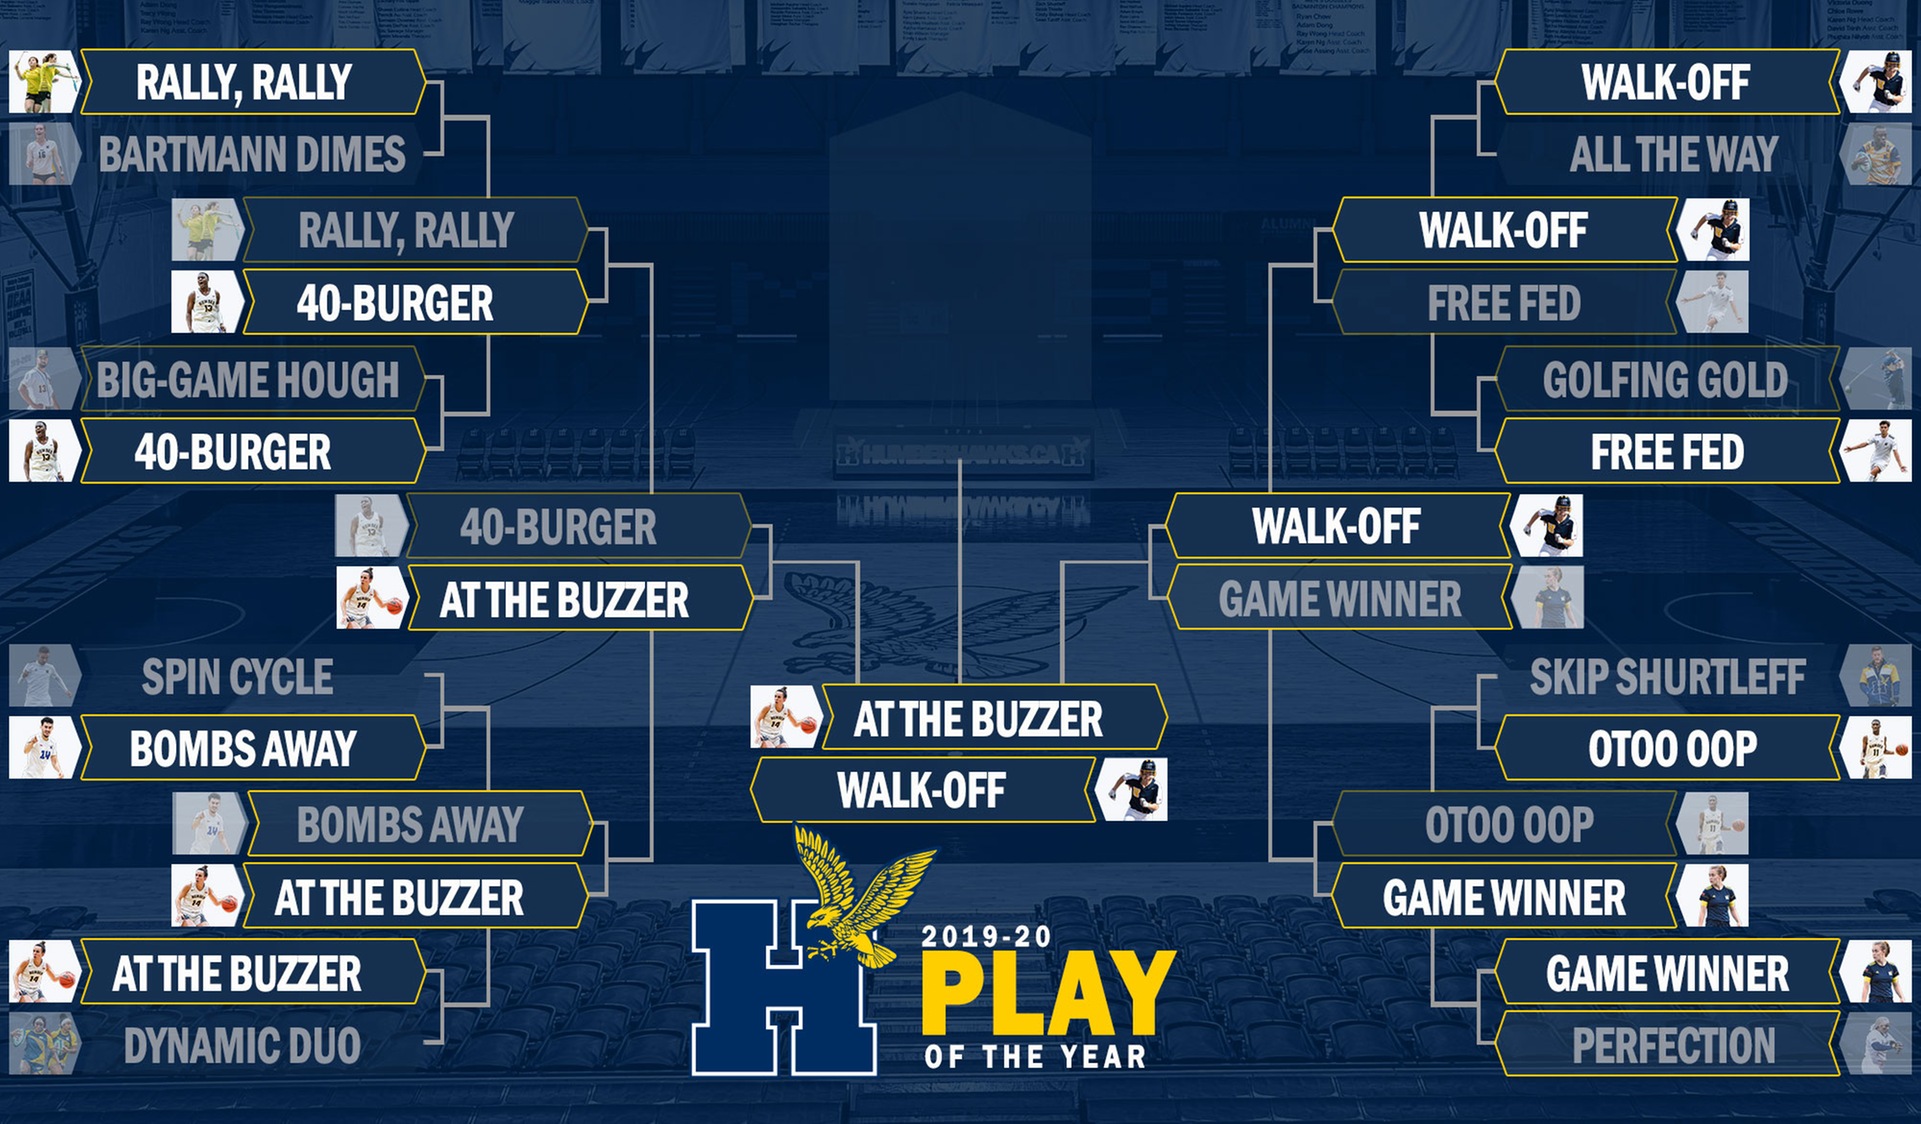 Updated Play of the Year bracket - semifinal results. Walk-off versus at the buzzer in the finals.